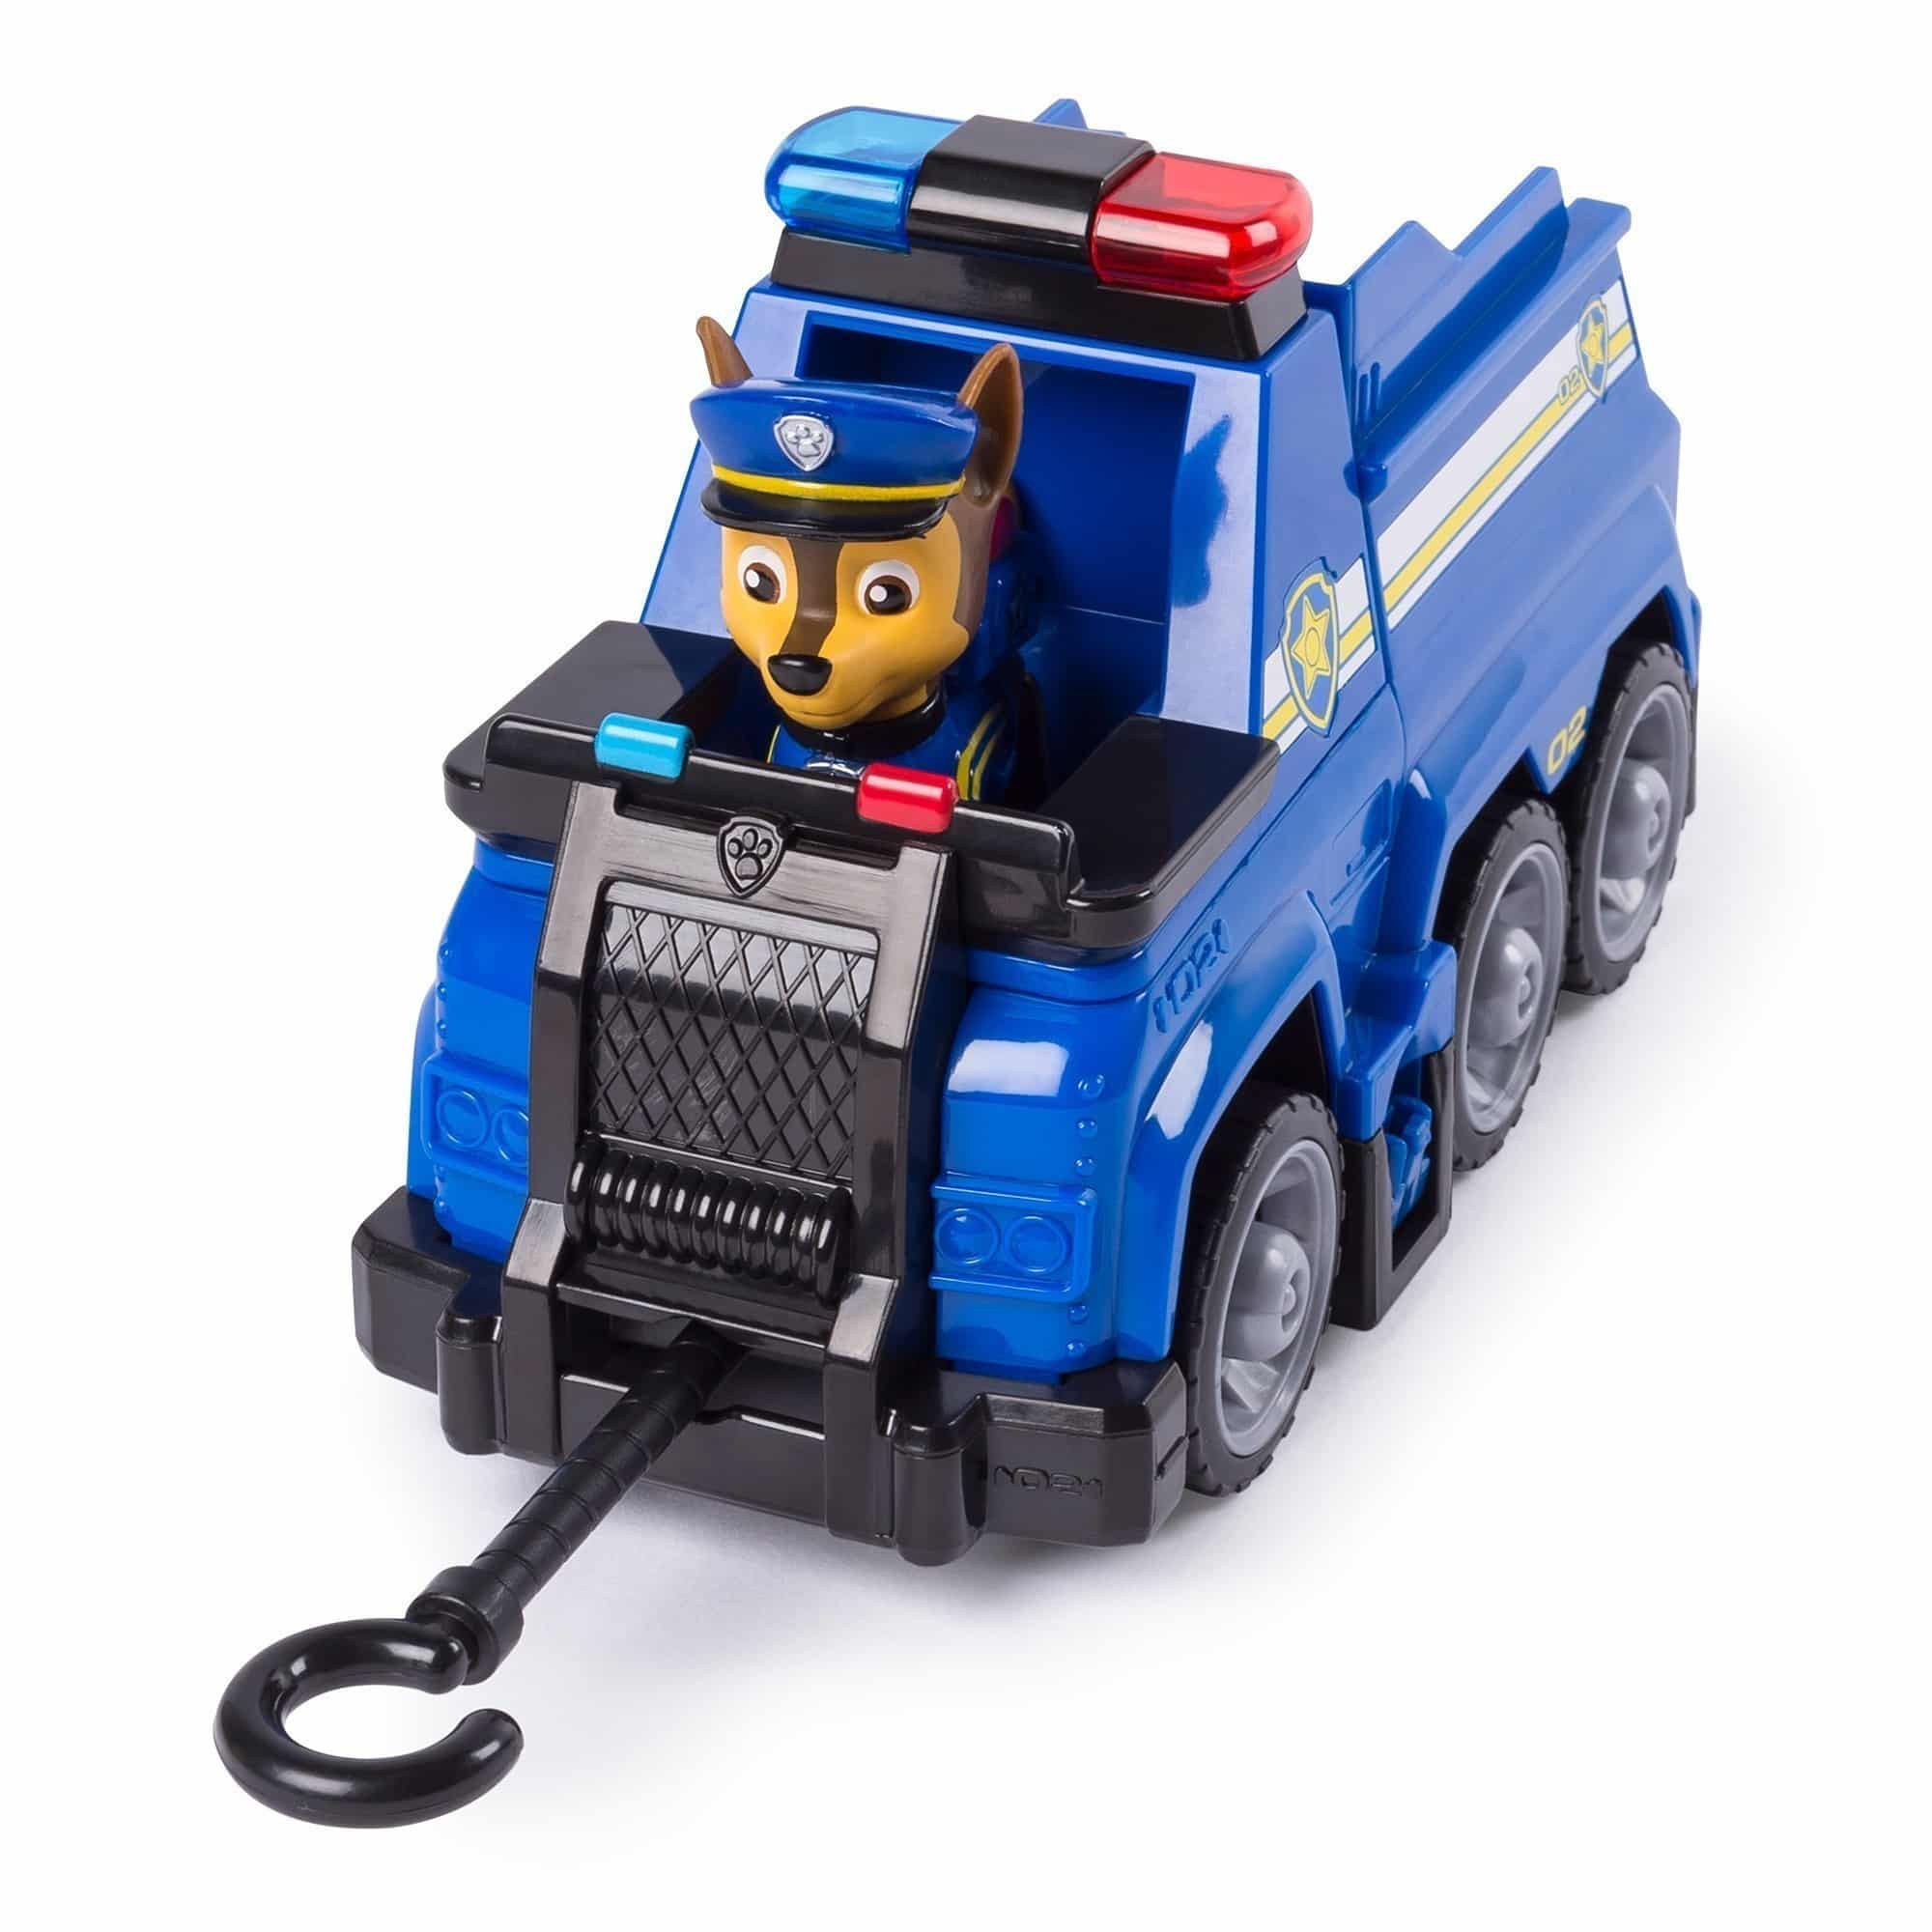 Nickelodeon - Paw Patrol Ultimate Rescue - Chase Police Cruiser